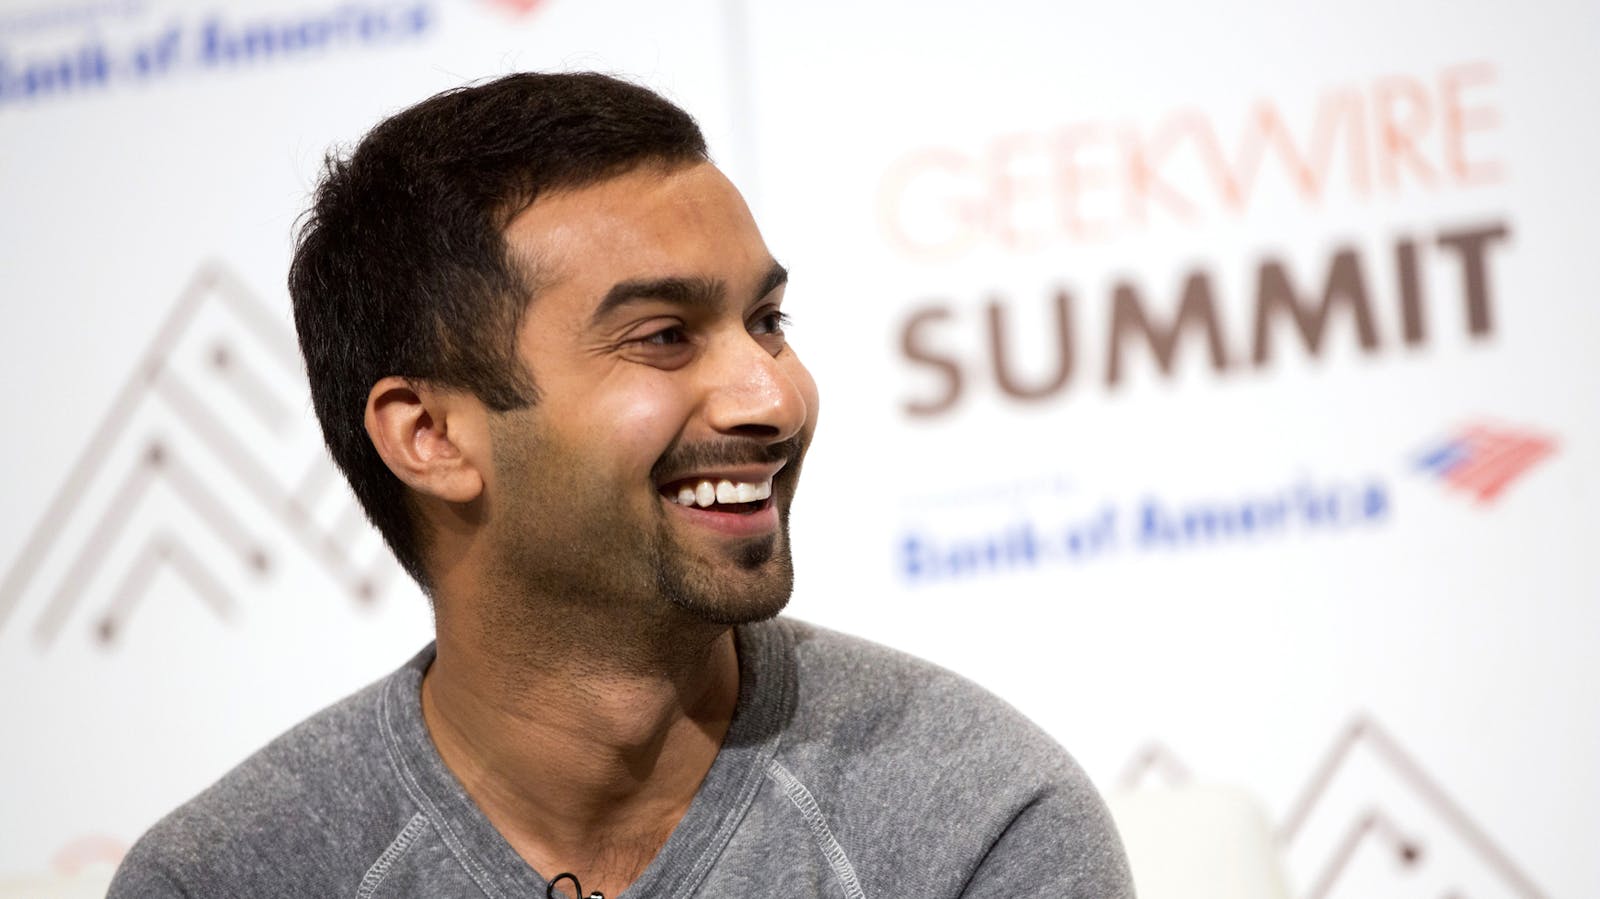 Apoorva Mehta, founder and CEO of Instacart, at an event last year. Photo by Bloomberg